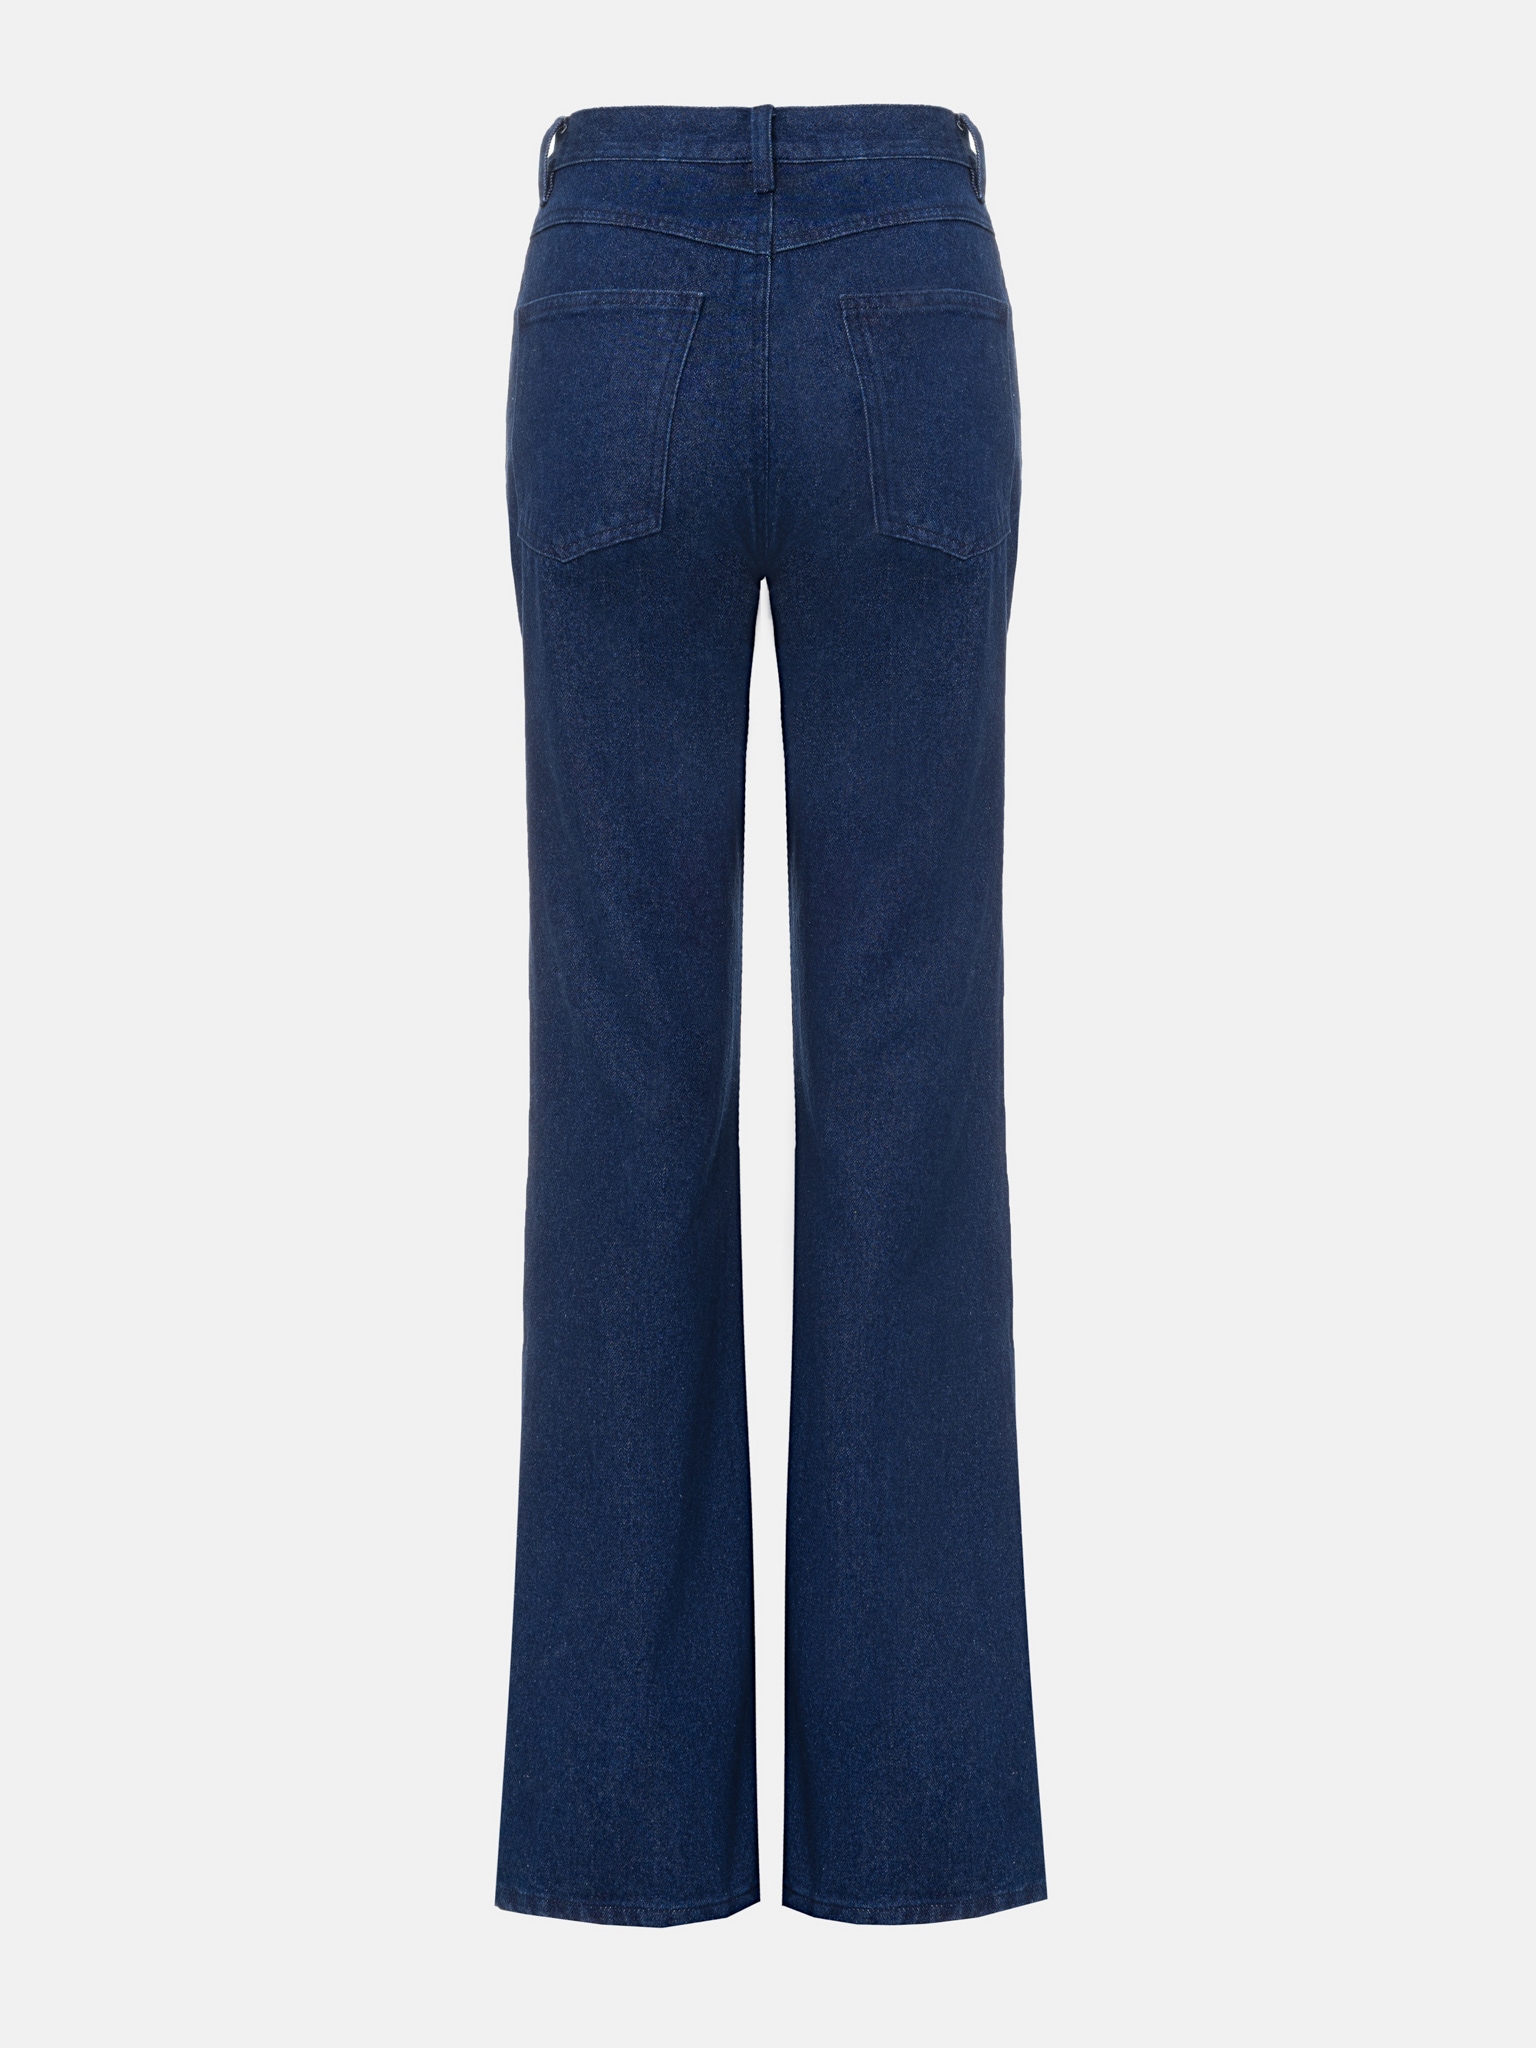 Flared jeans with square-shape pockets